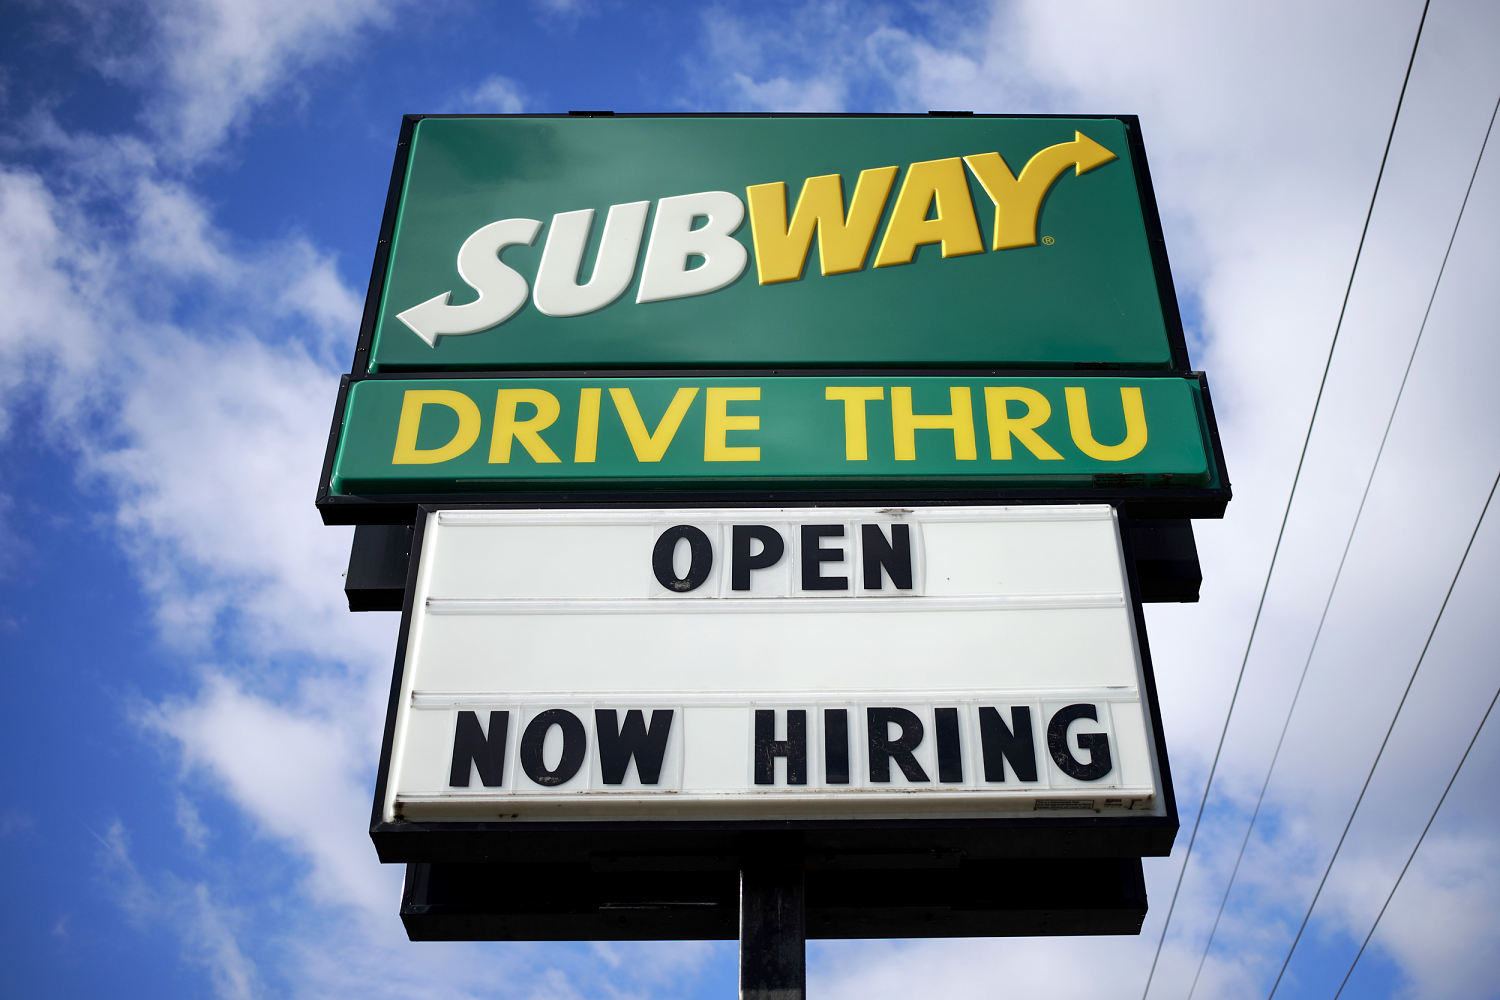 Georgia woman accidentally tipped more than $7,000 for a Subway sandwich